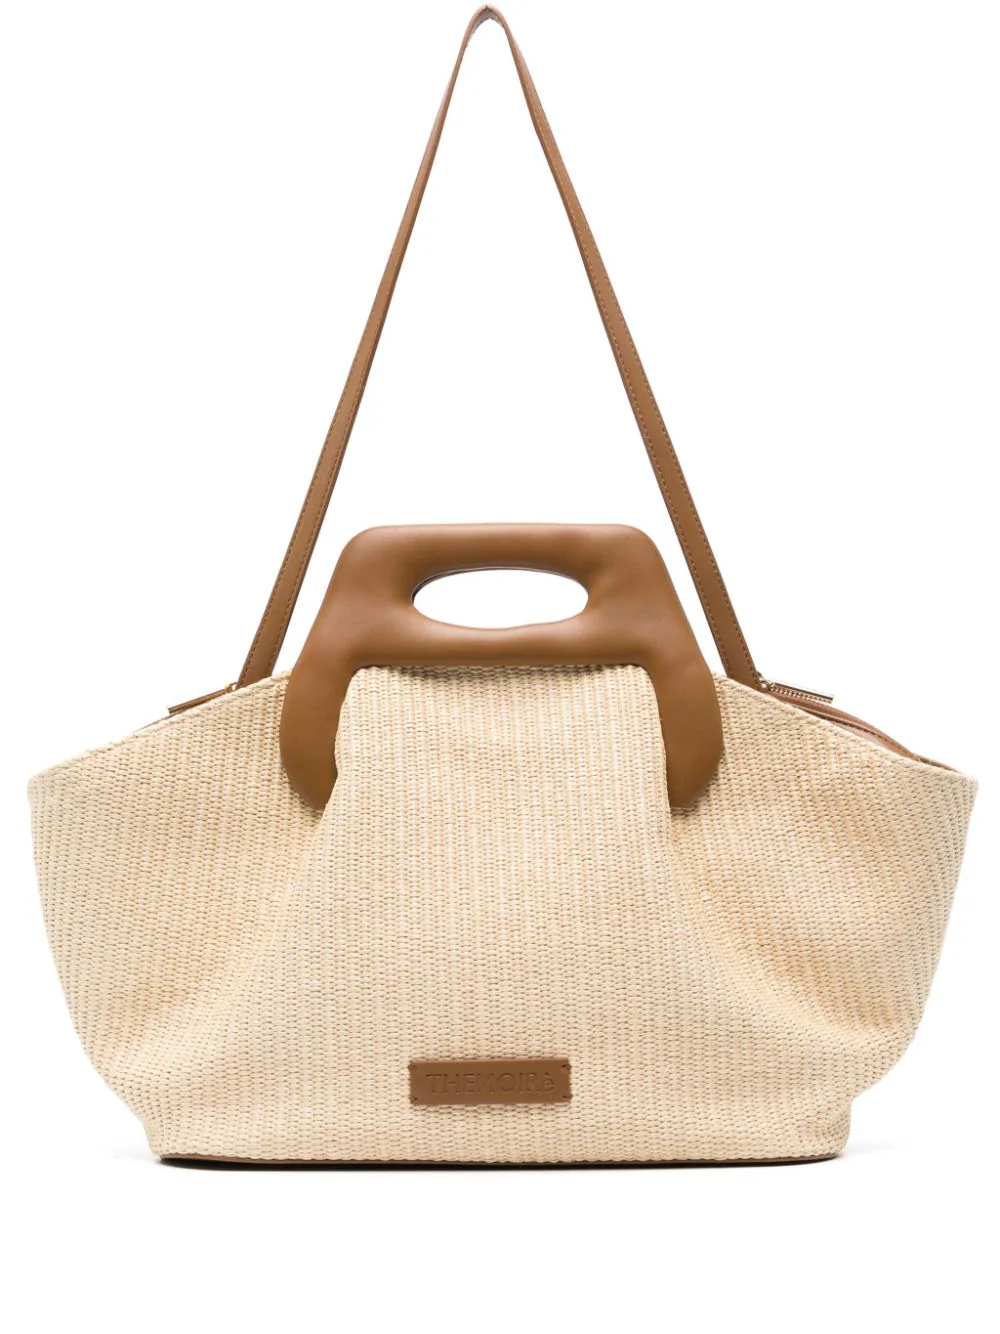 Shop Themoire' Dhea Tote Bag In Nude & Neutrals